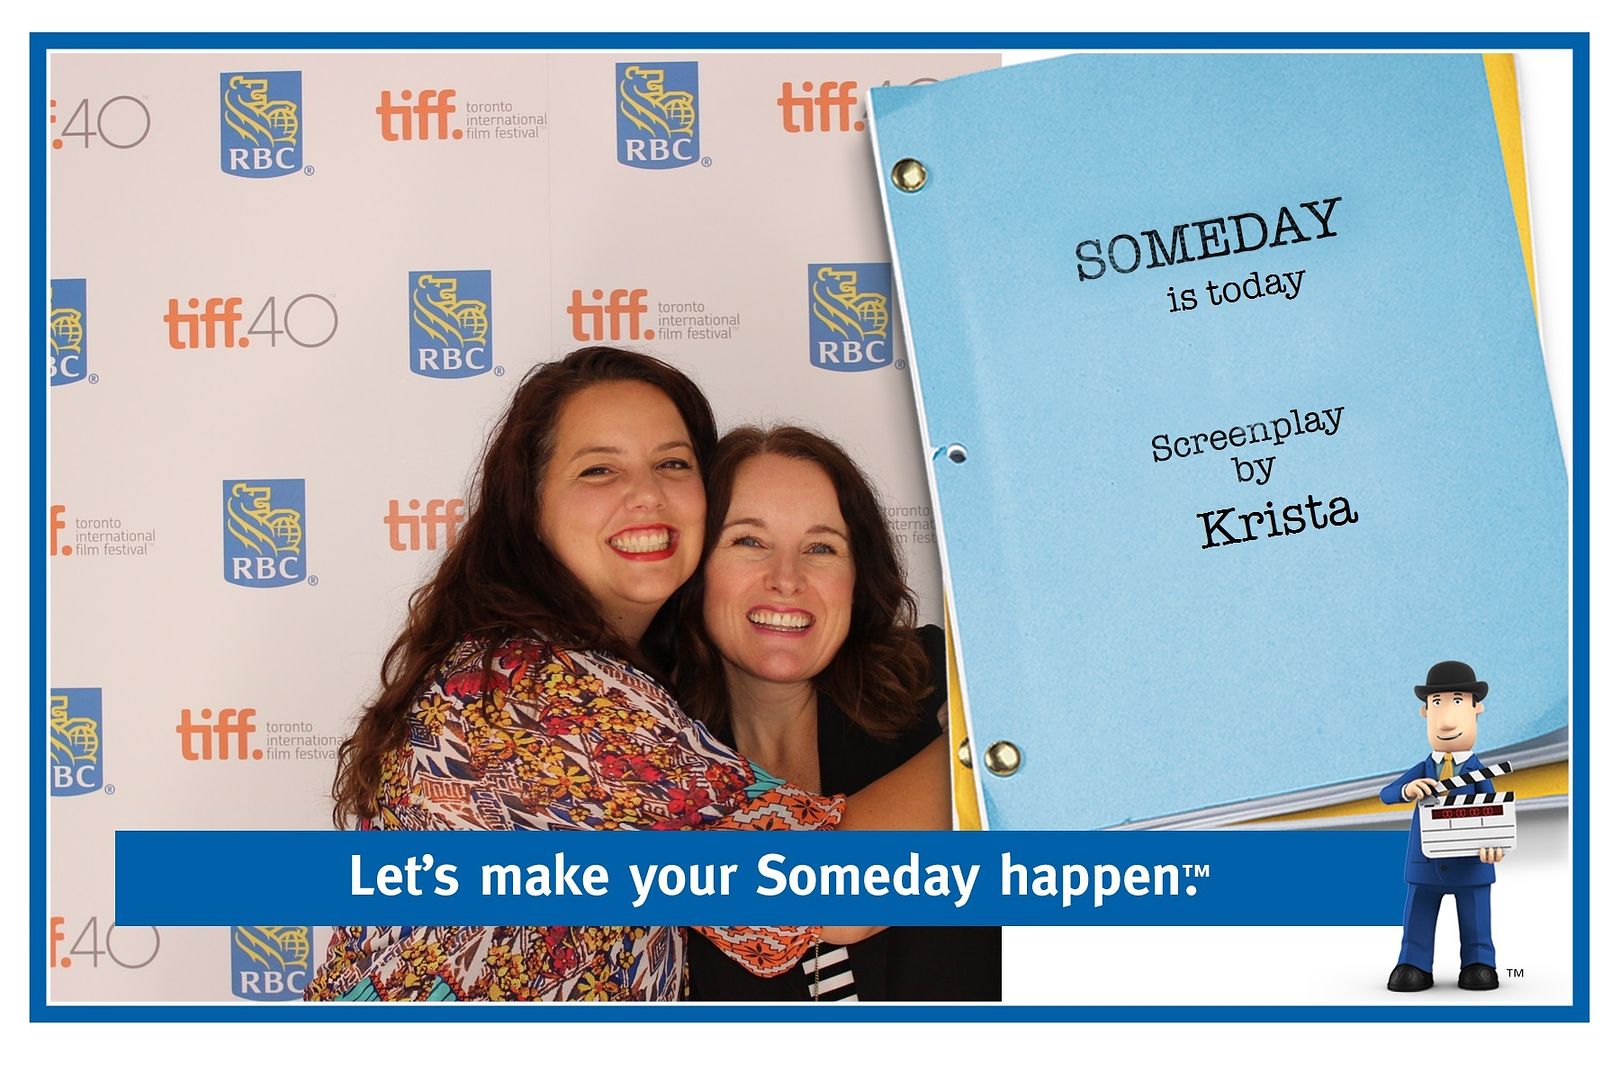 rbc someday zpsjwbsfoia TIFF weekend to remember